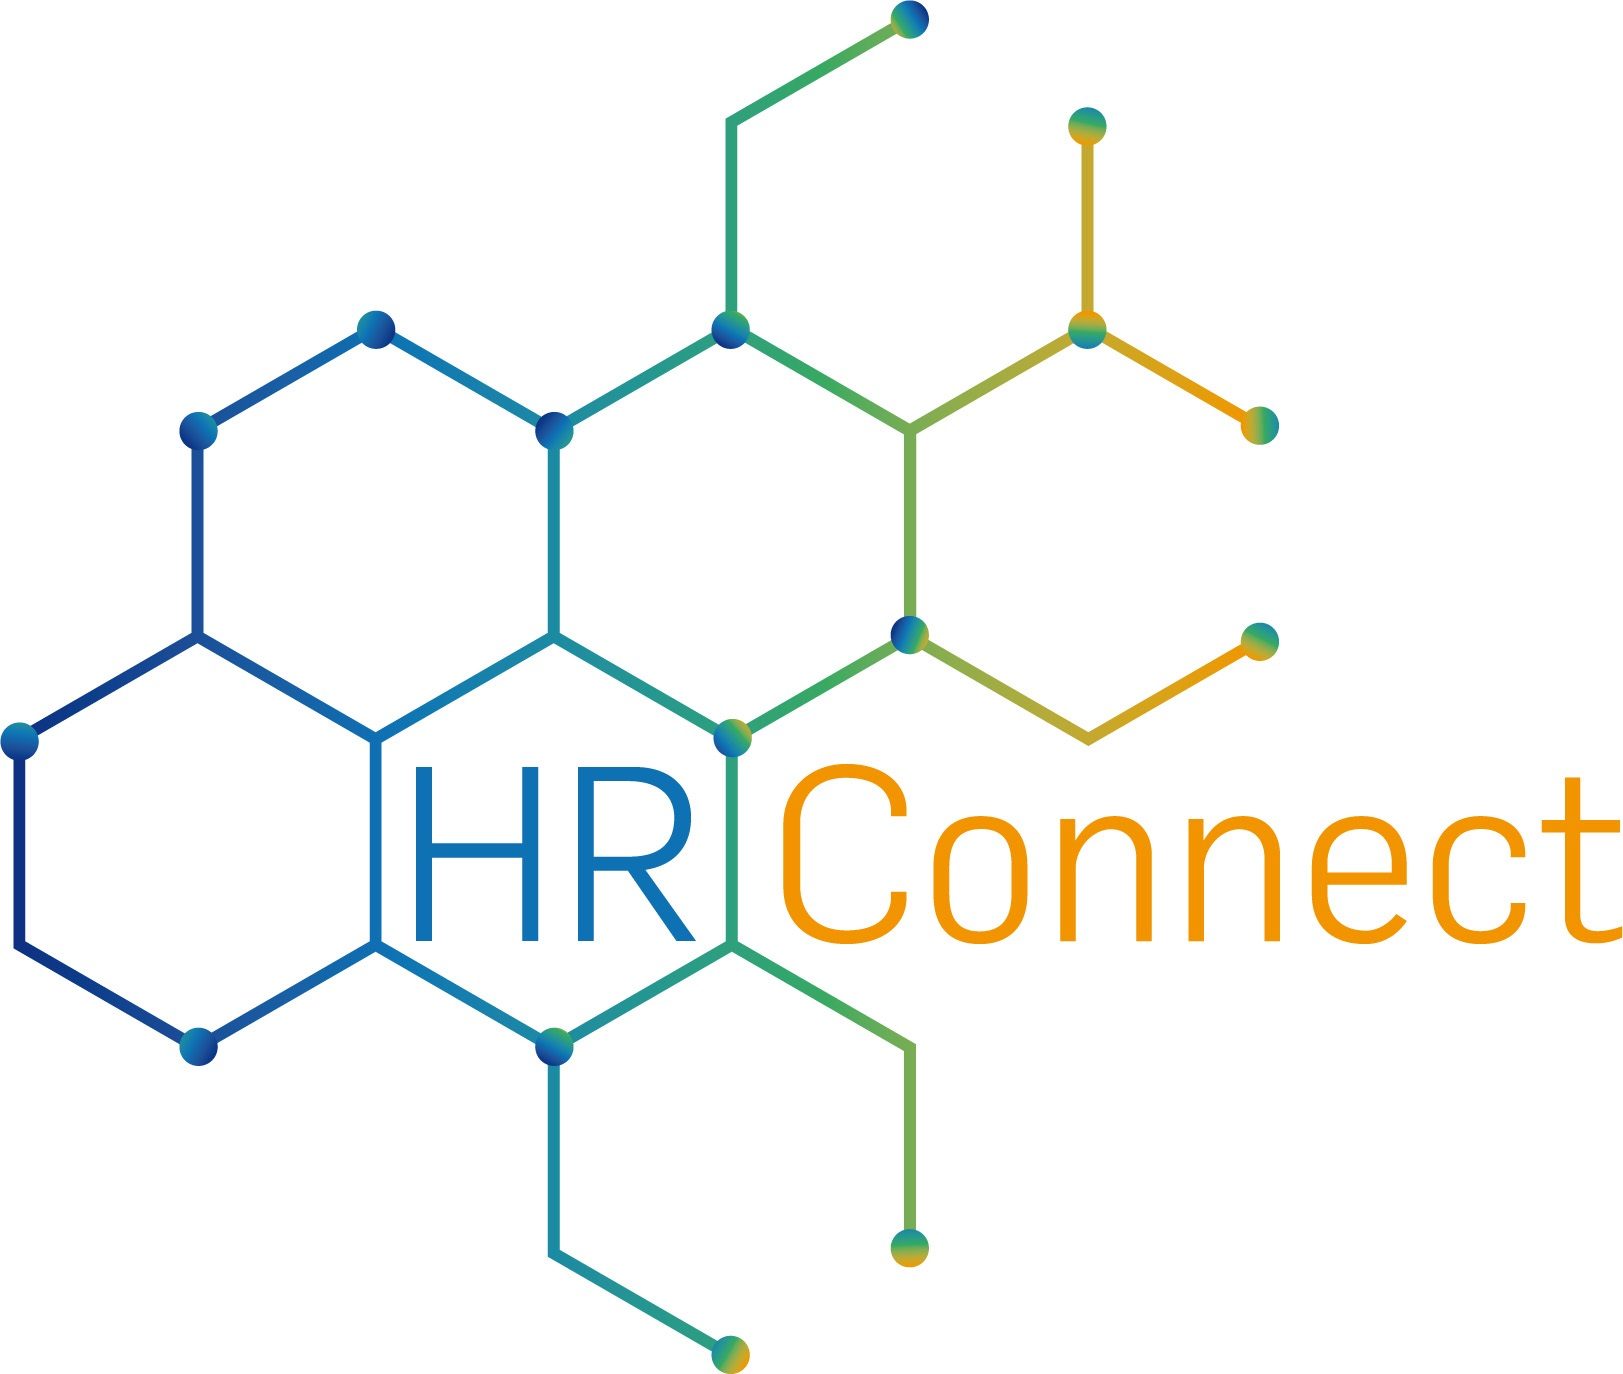 HR Connect Solution